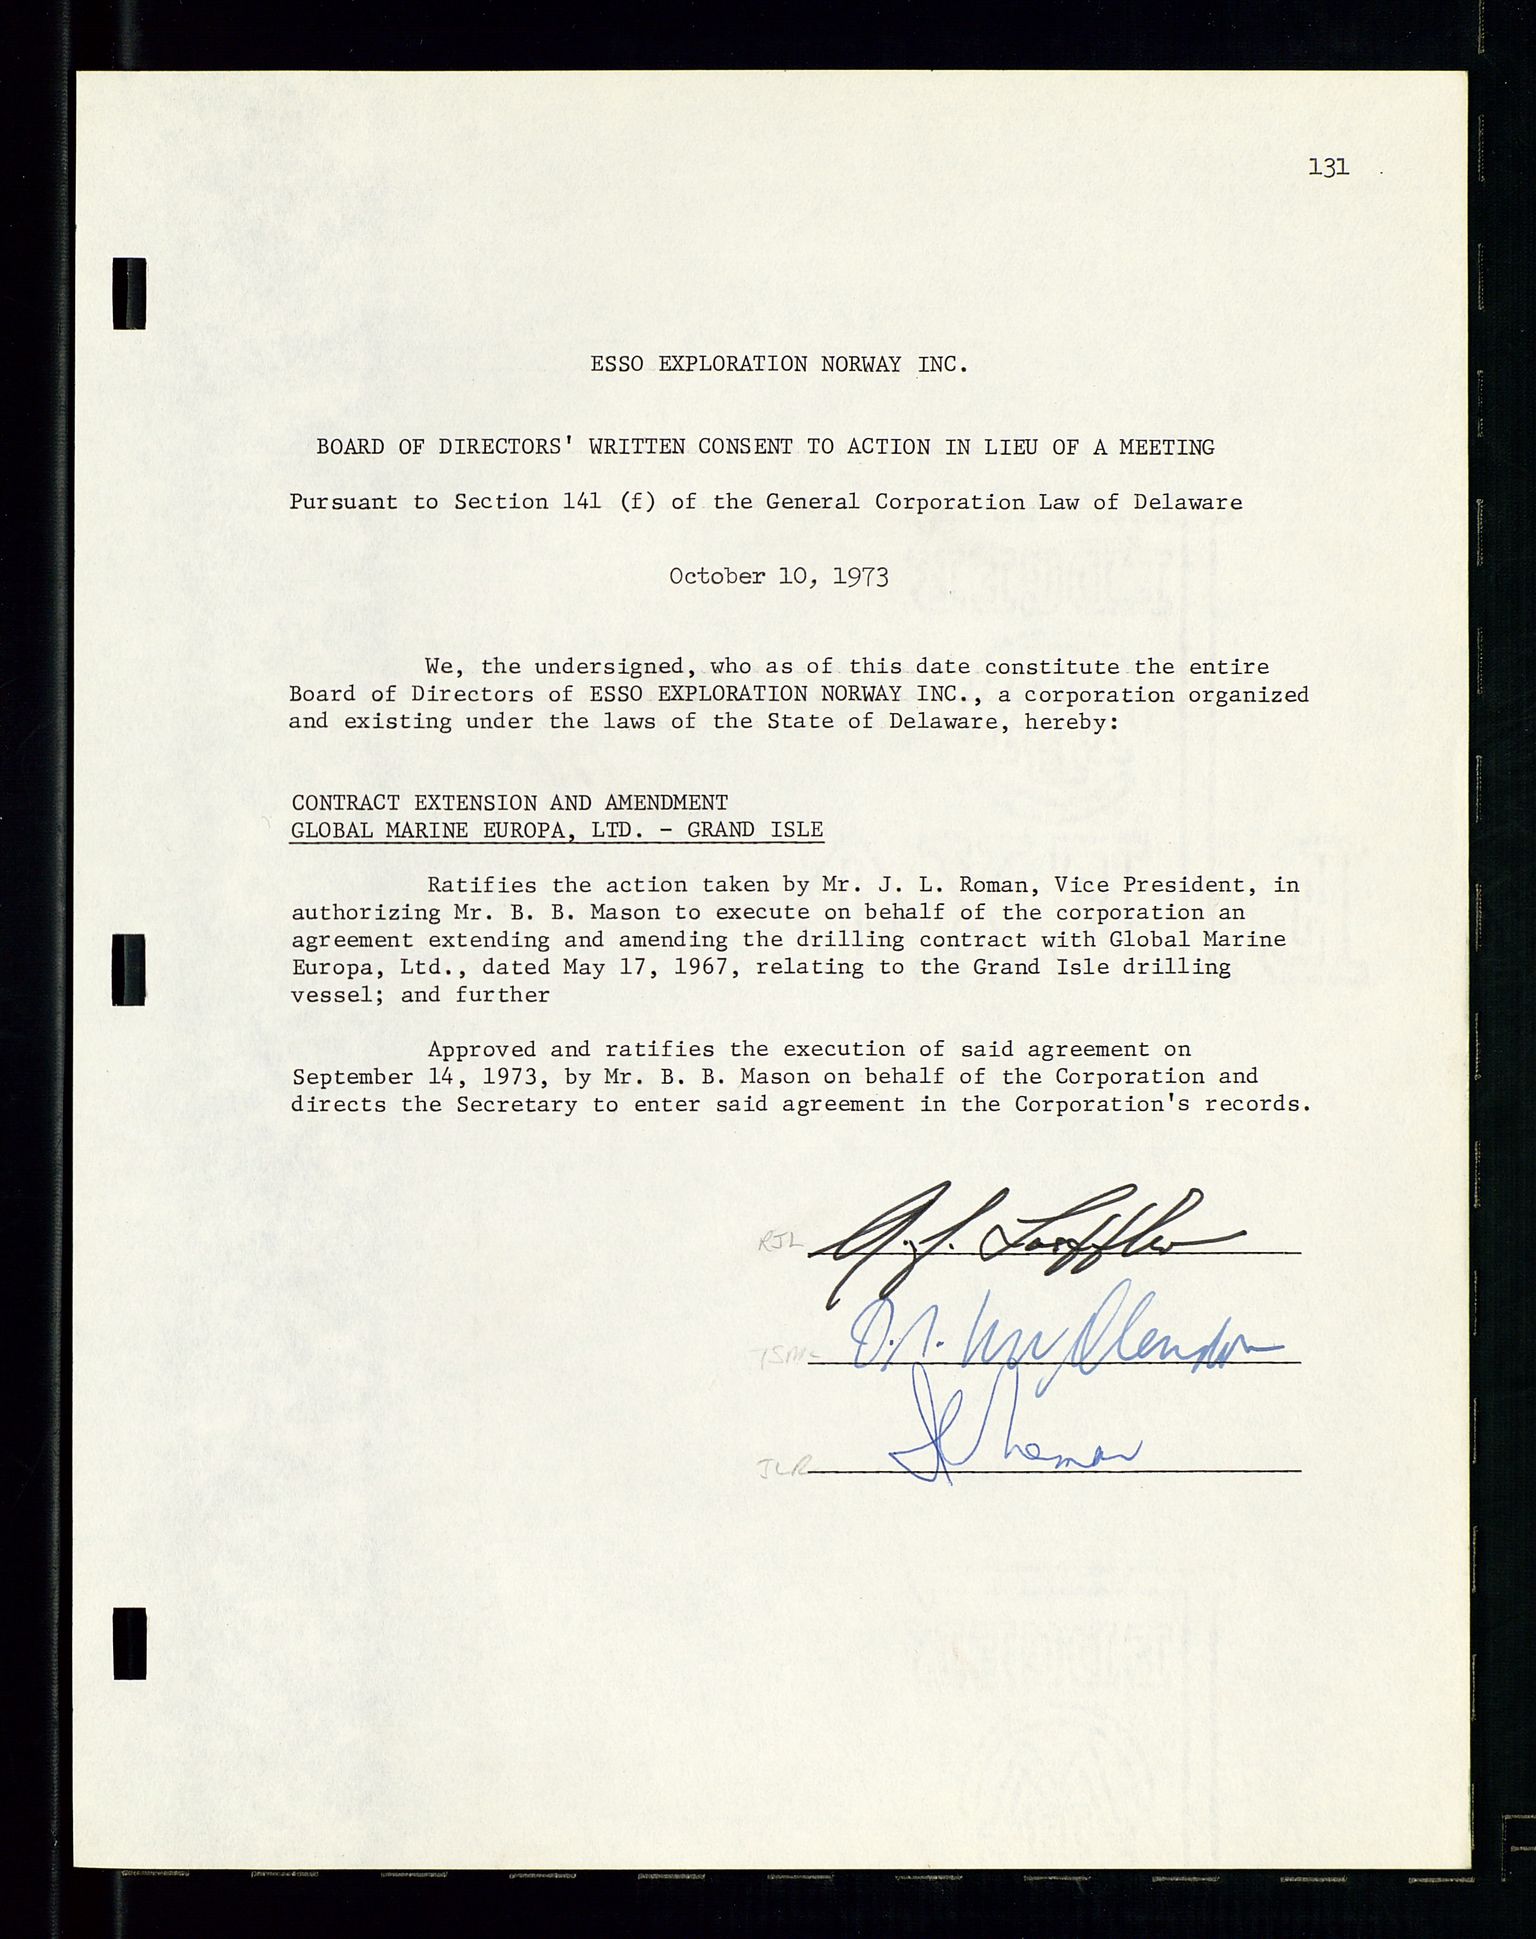 Pa 1512 - Esso Exploration and Production Norway Inc., SAST/A-101917/A/Aa/L0001/0001: Styredokumenter / Corporate records, By-Laws, Board meeting minutes, Incorporations, 1965-1975, p. 131